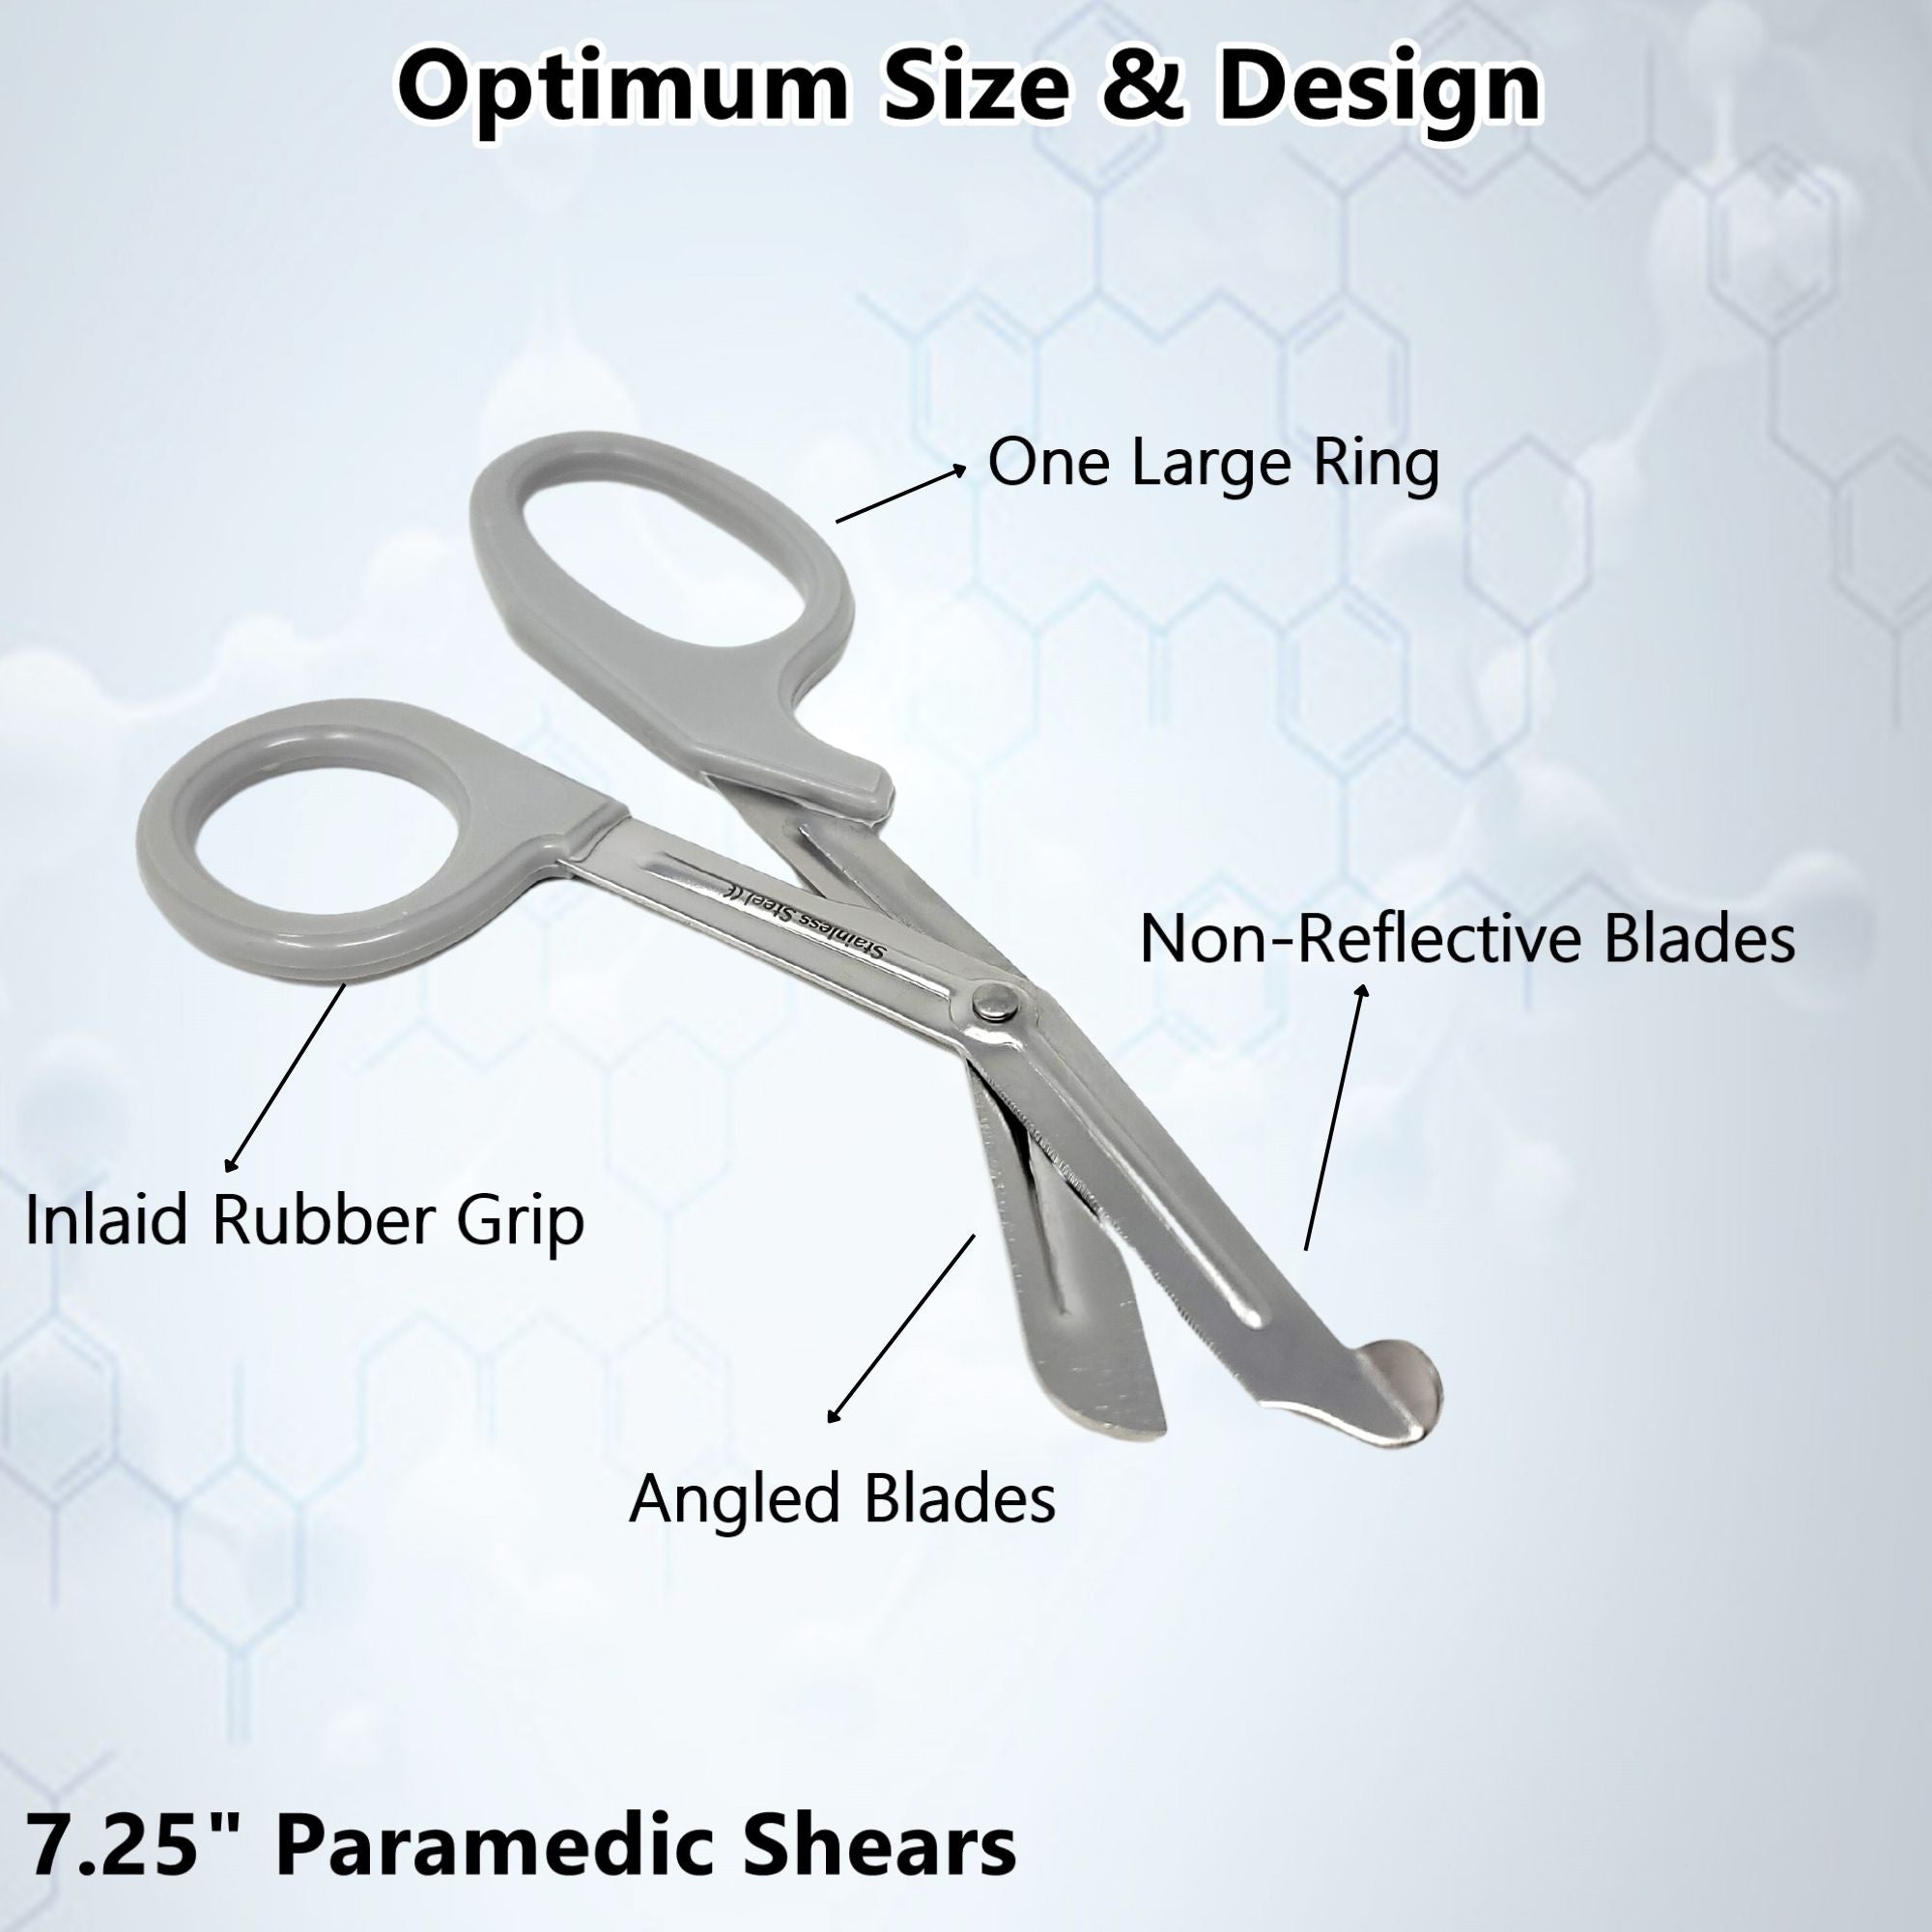 Medical Bandage Scissors - Trauma Scissors and EMT First Responder Shears -  Made with Premium Quality Stainless Steel for Nurse, Doctors, First Aid